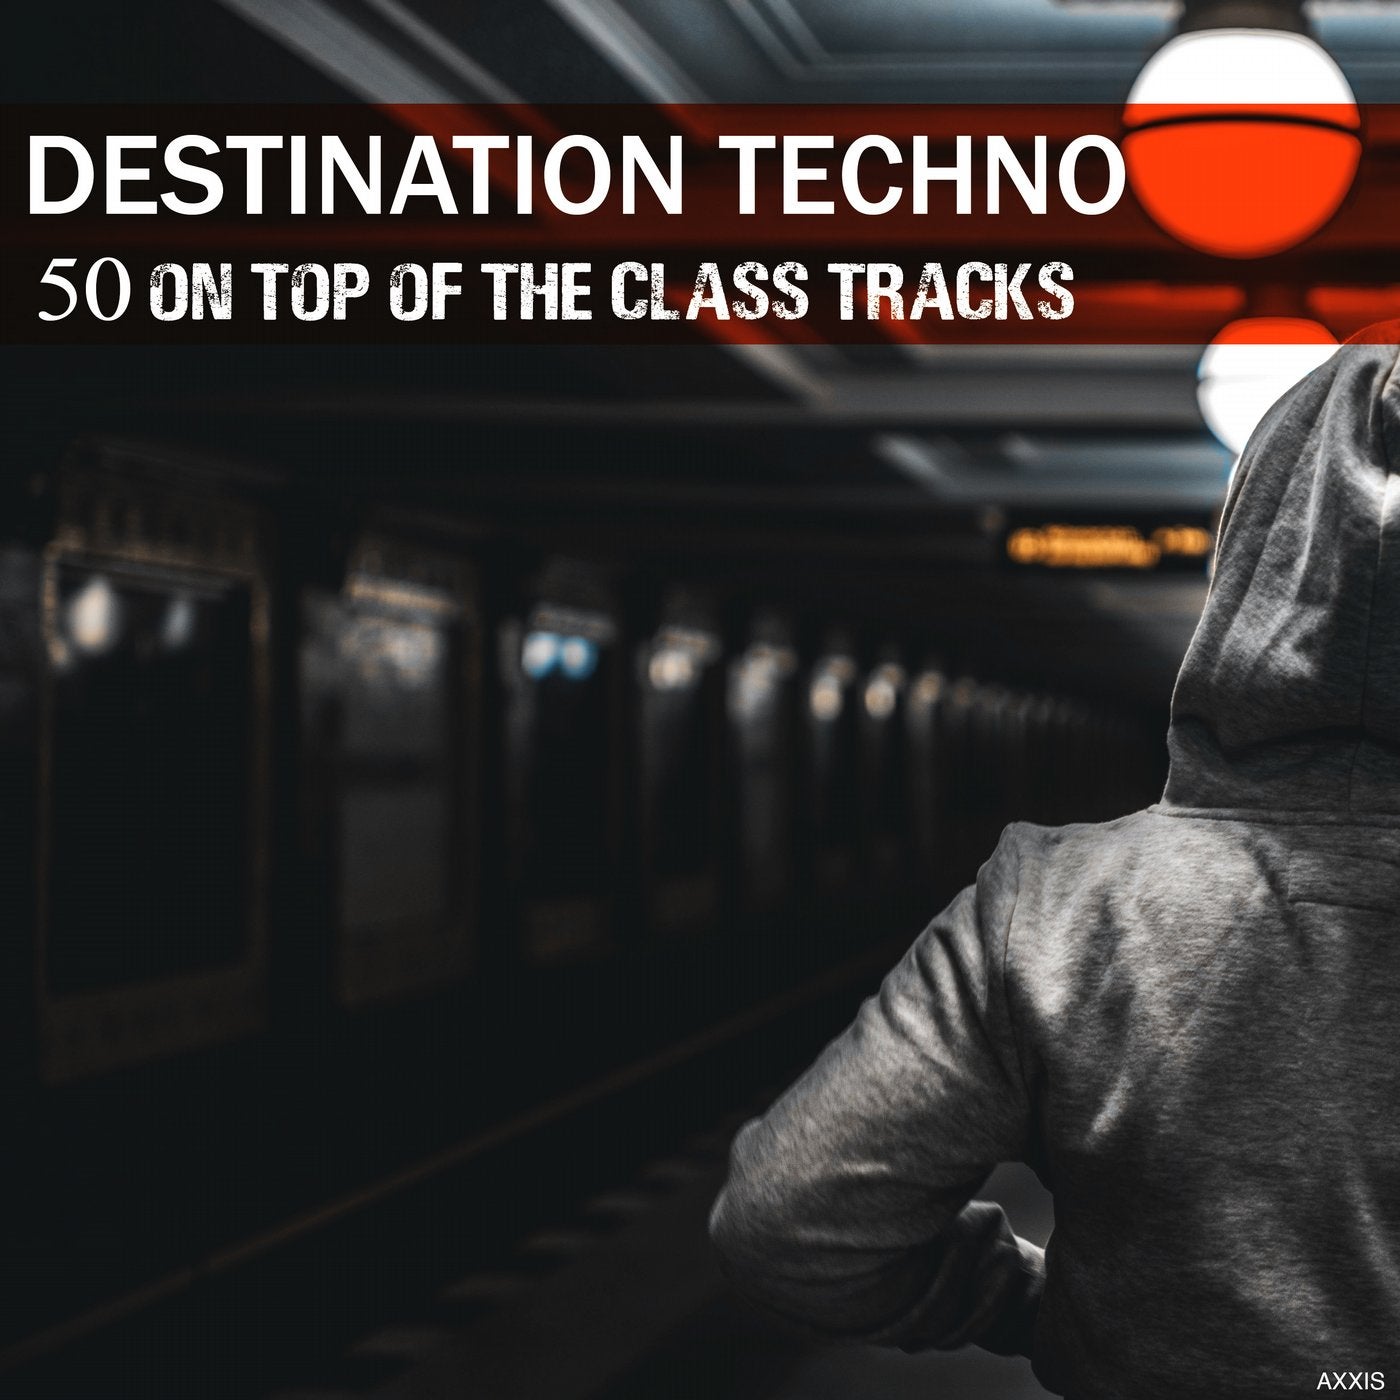 Destination Techno: 50 on Top of the Class Tracks